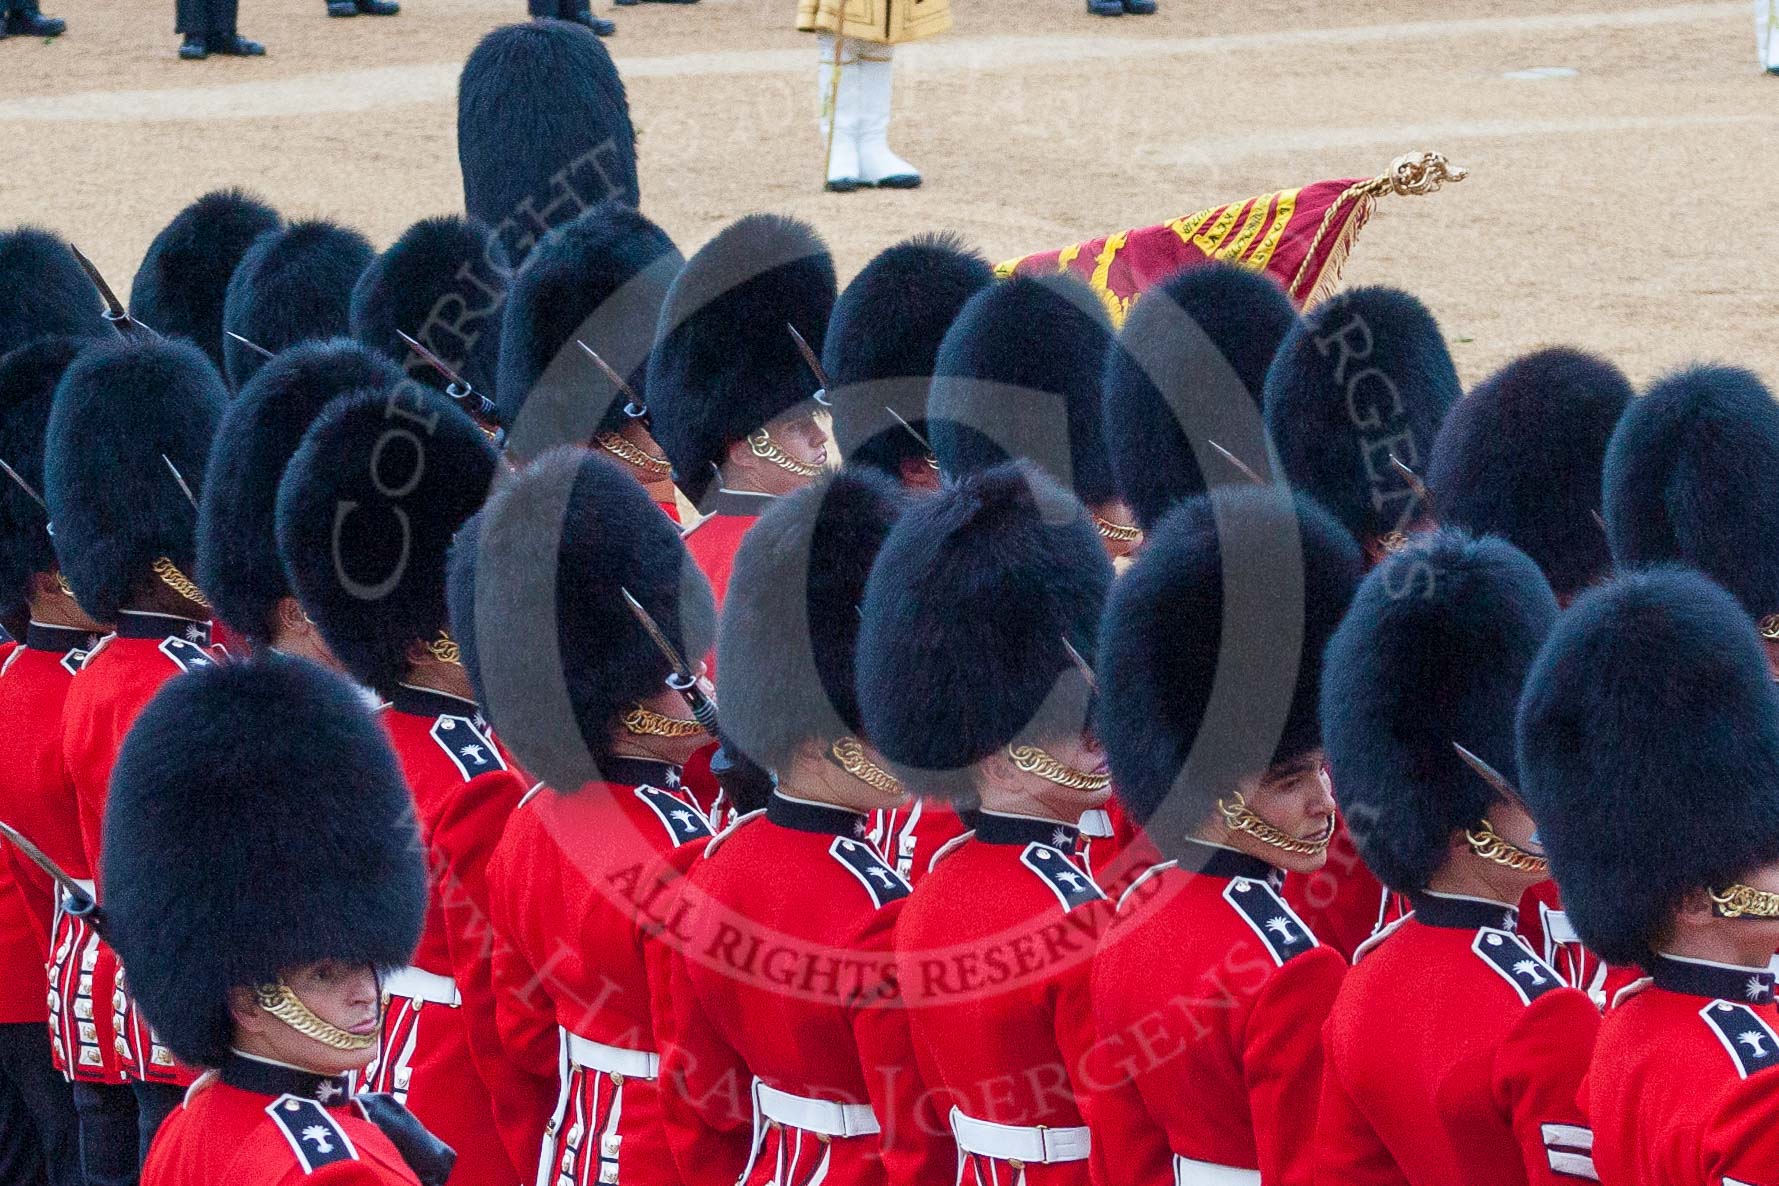 Trooping the Colour 2015. Image #458, 13 June 2015 11:35 Horse Guards Parade, London, UK